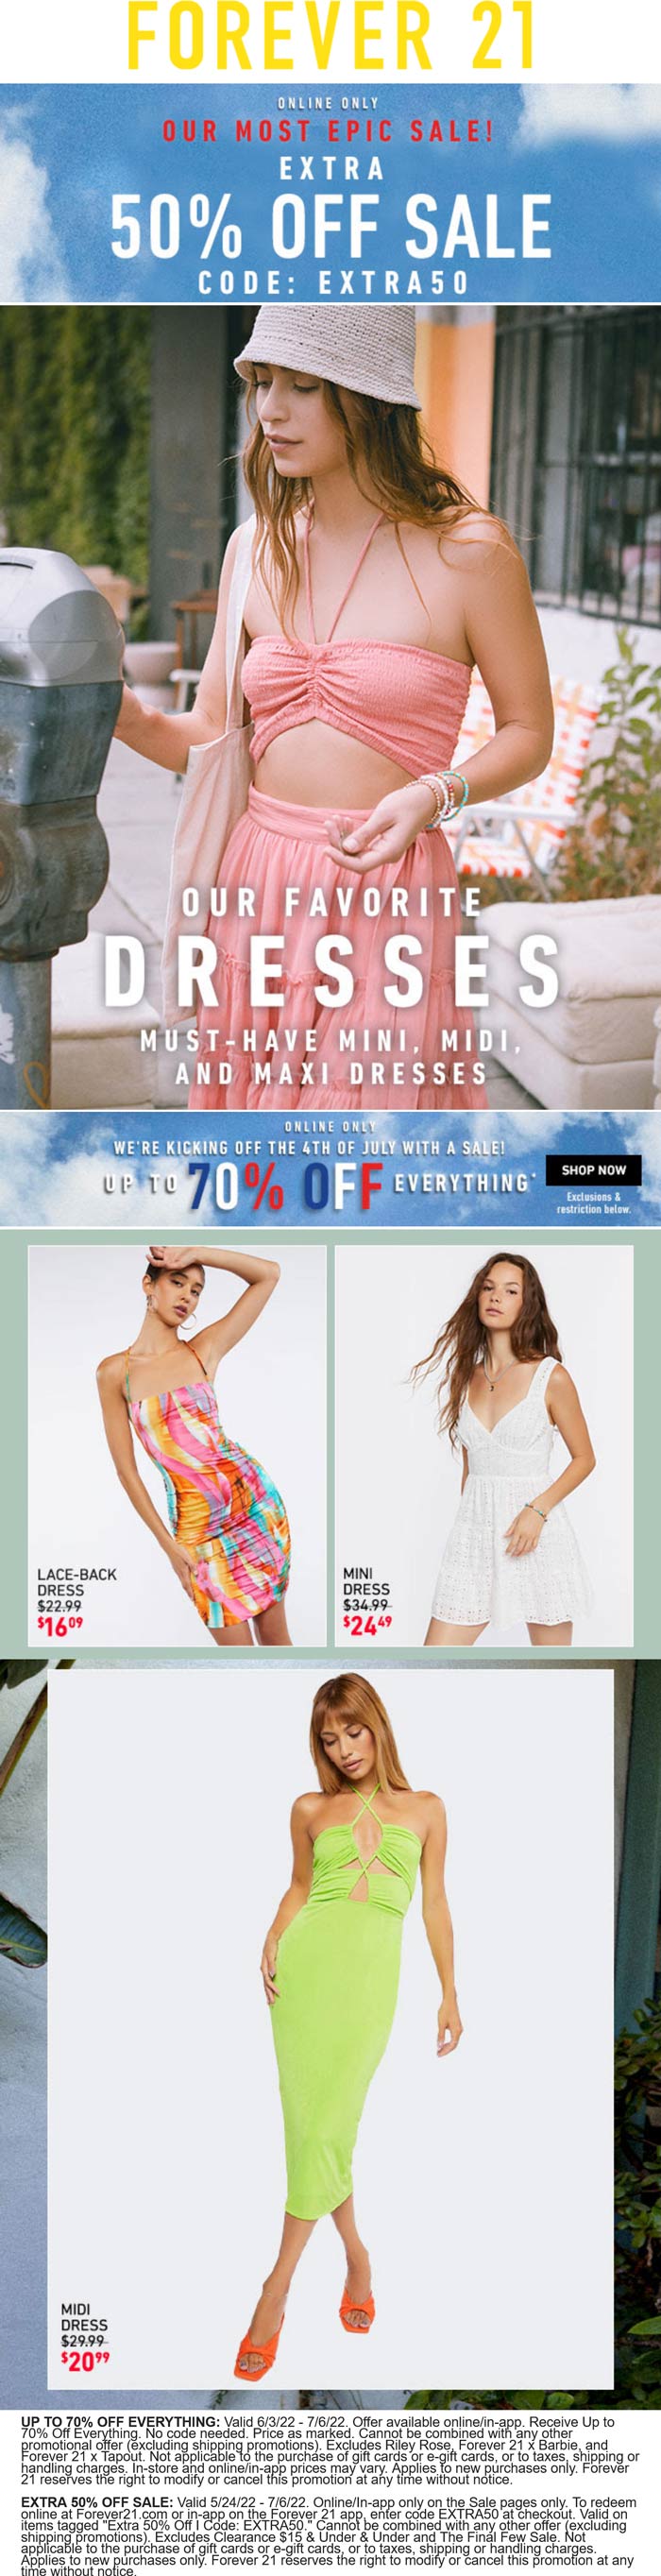 Forever 21 stores Coupon  Extra 50% off sale items online at Forever 21 via promo code EXTRA50 #forever21 